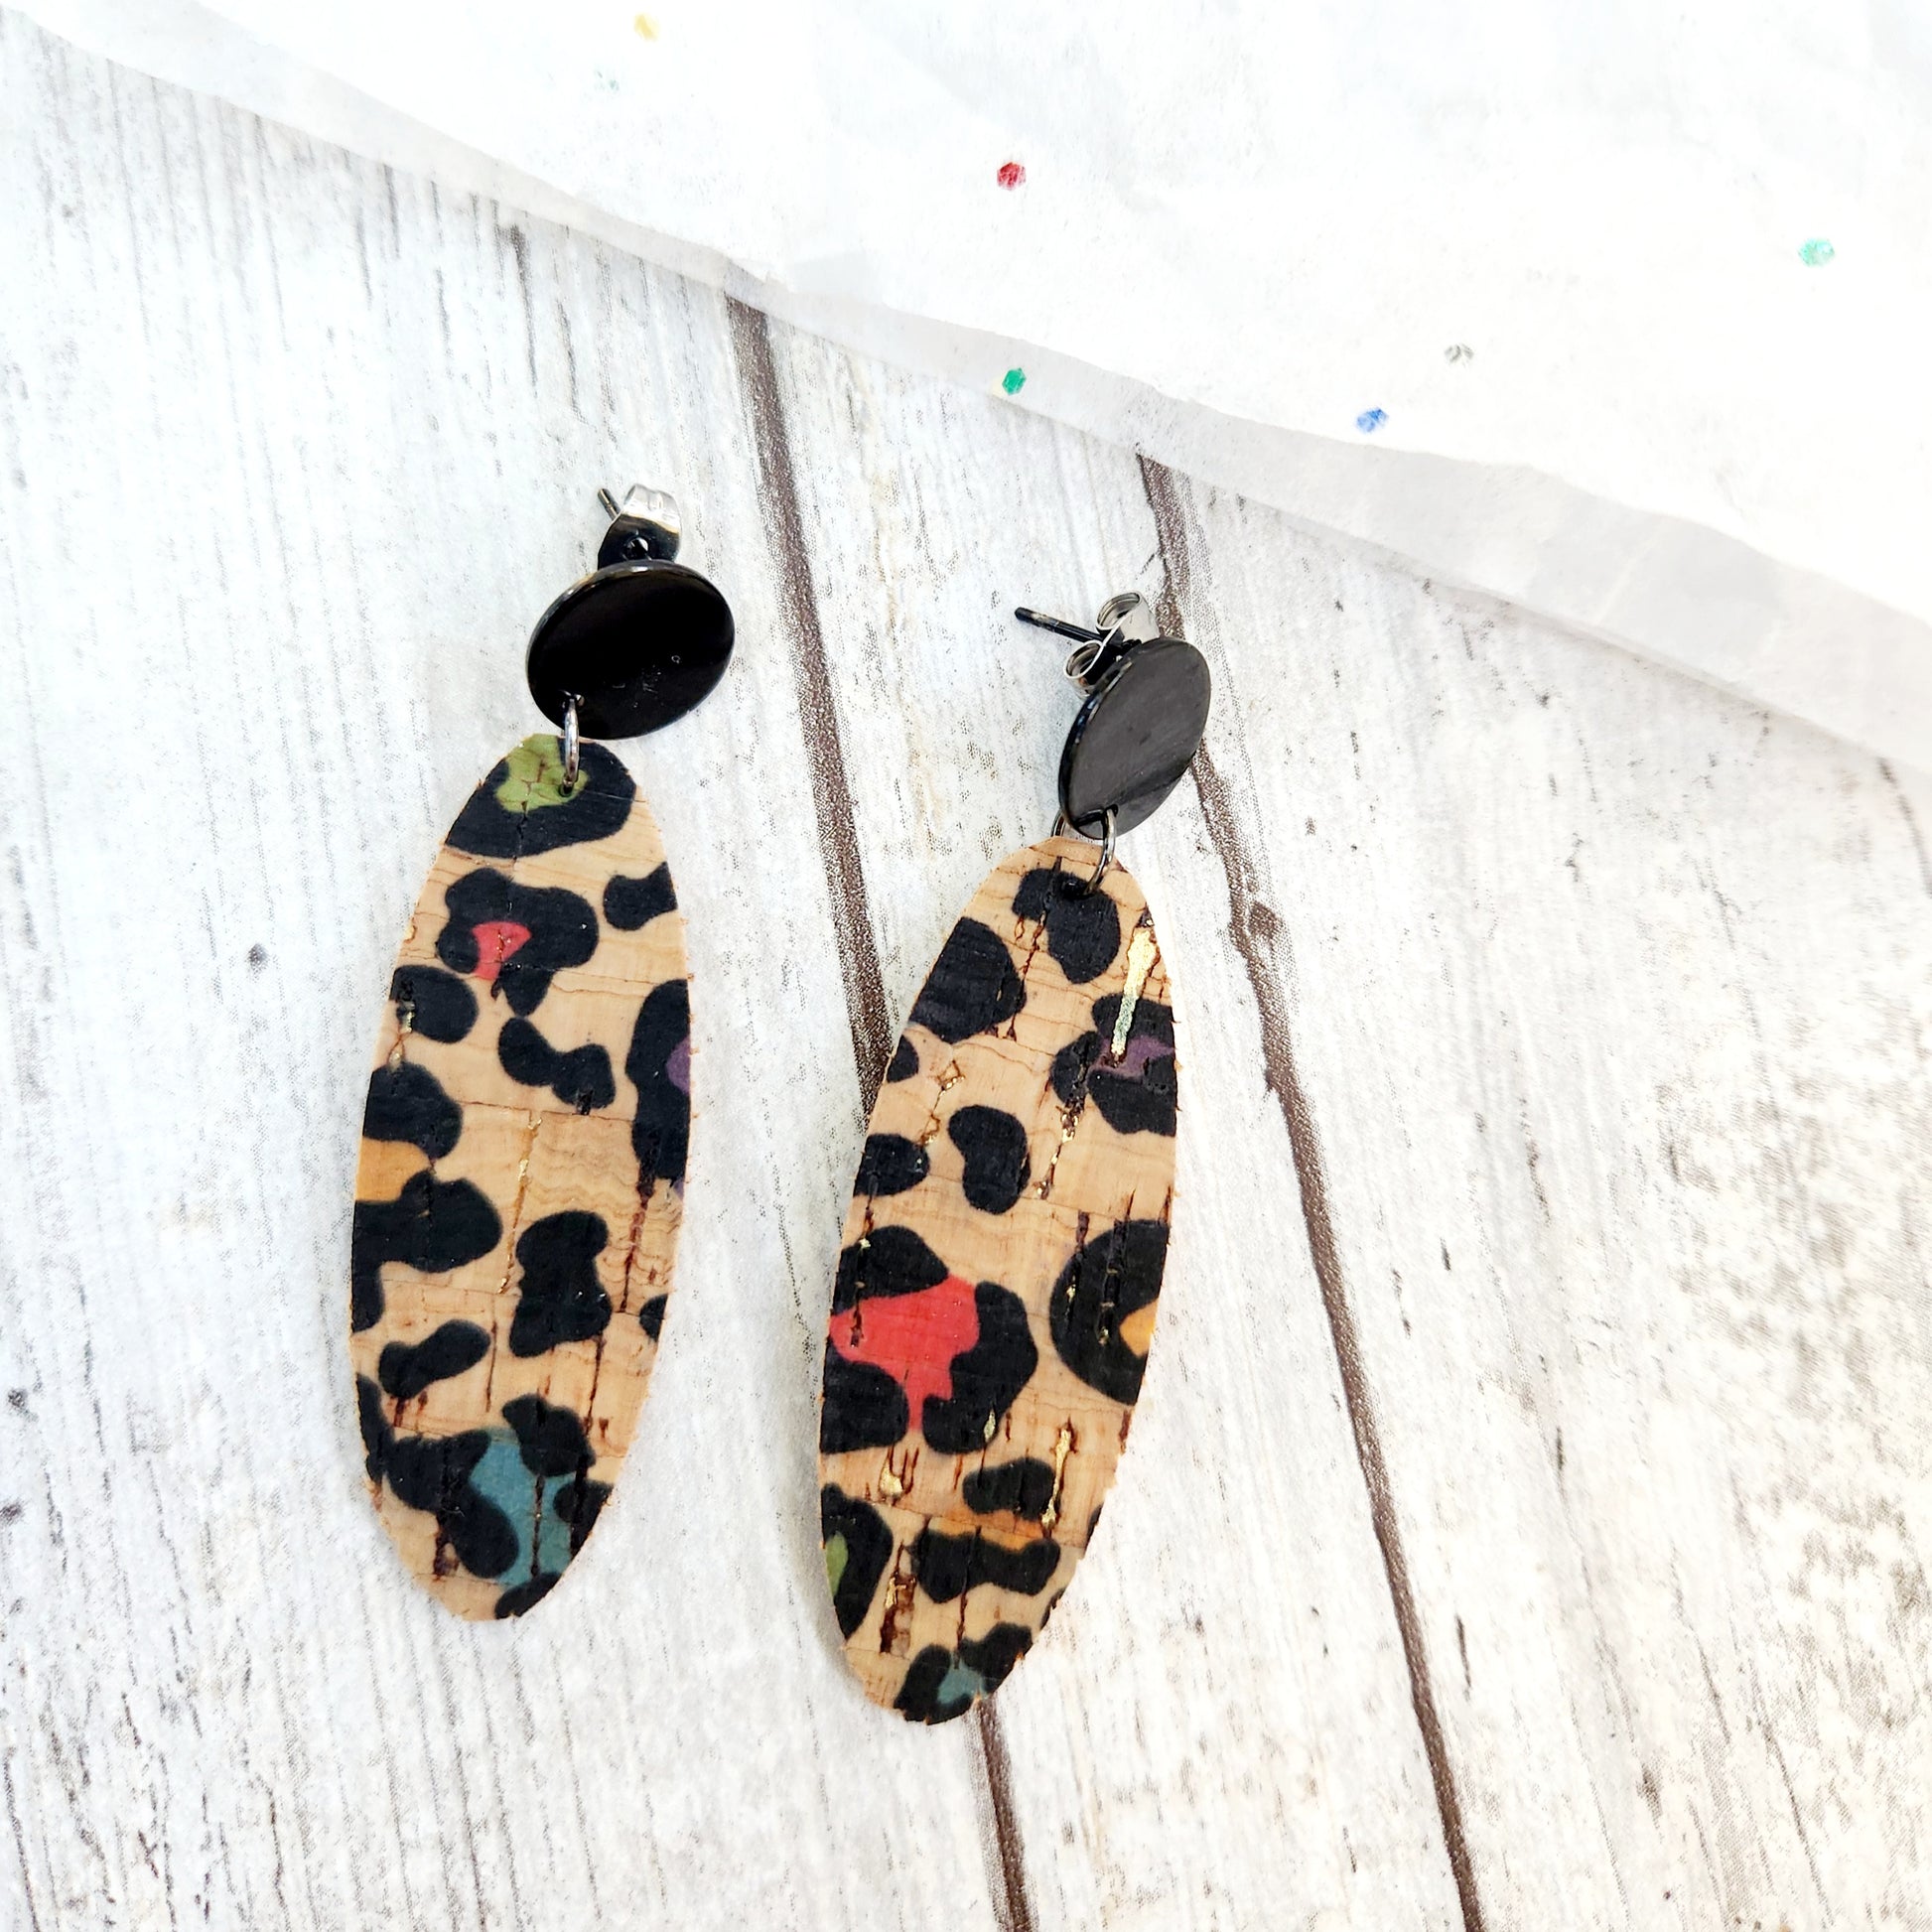 Bianca, natiral cork with a black leopard print woth green, red, yellow and blue in the spots. Hanging from a black circle stud.